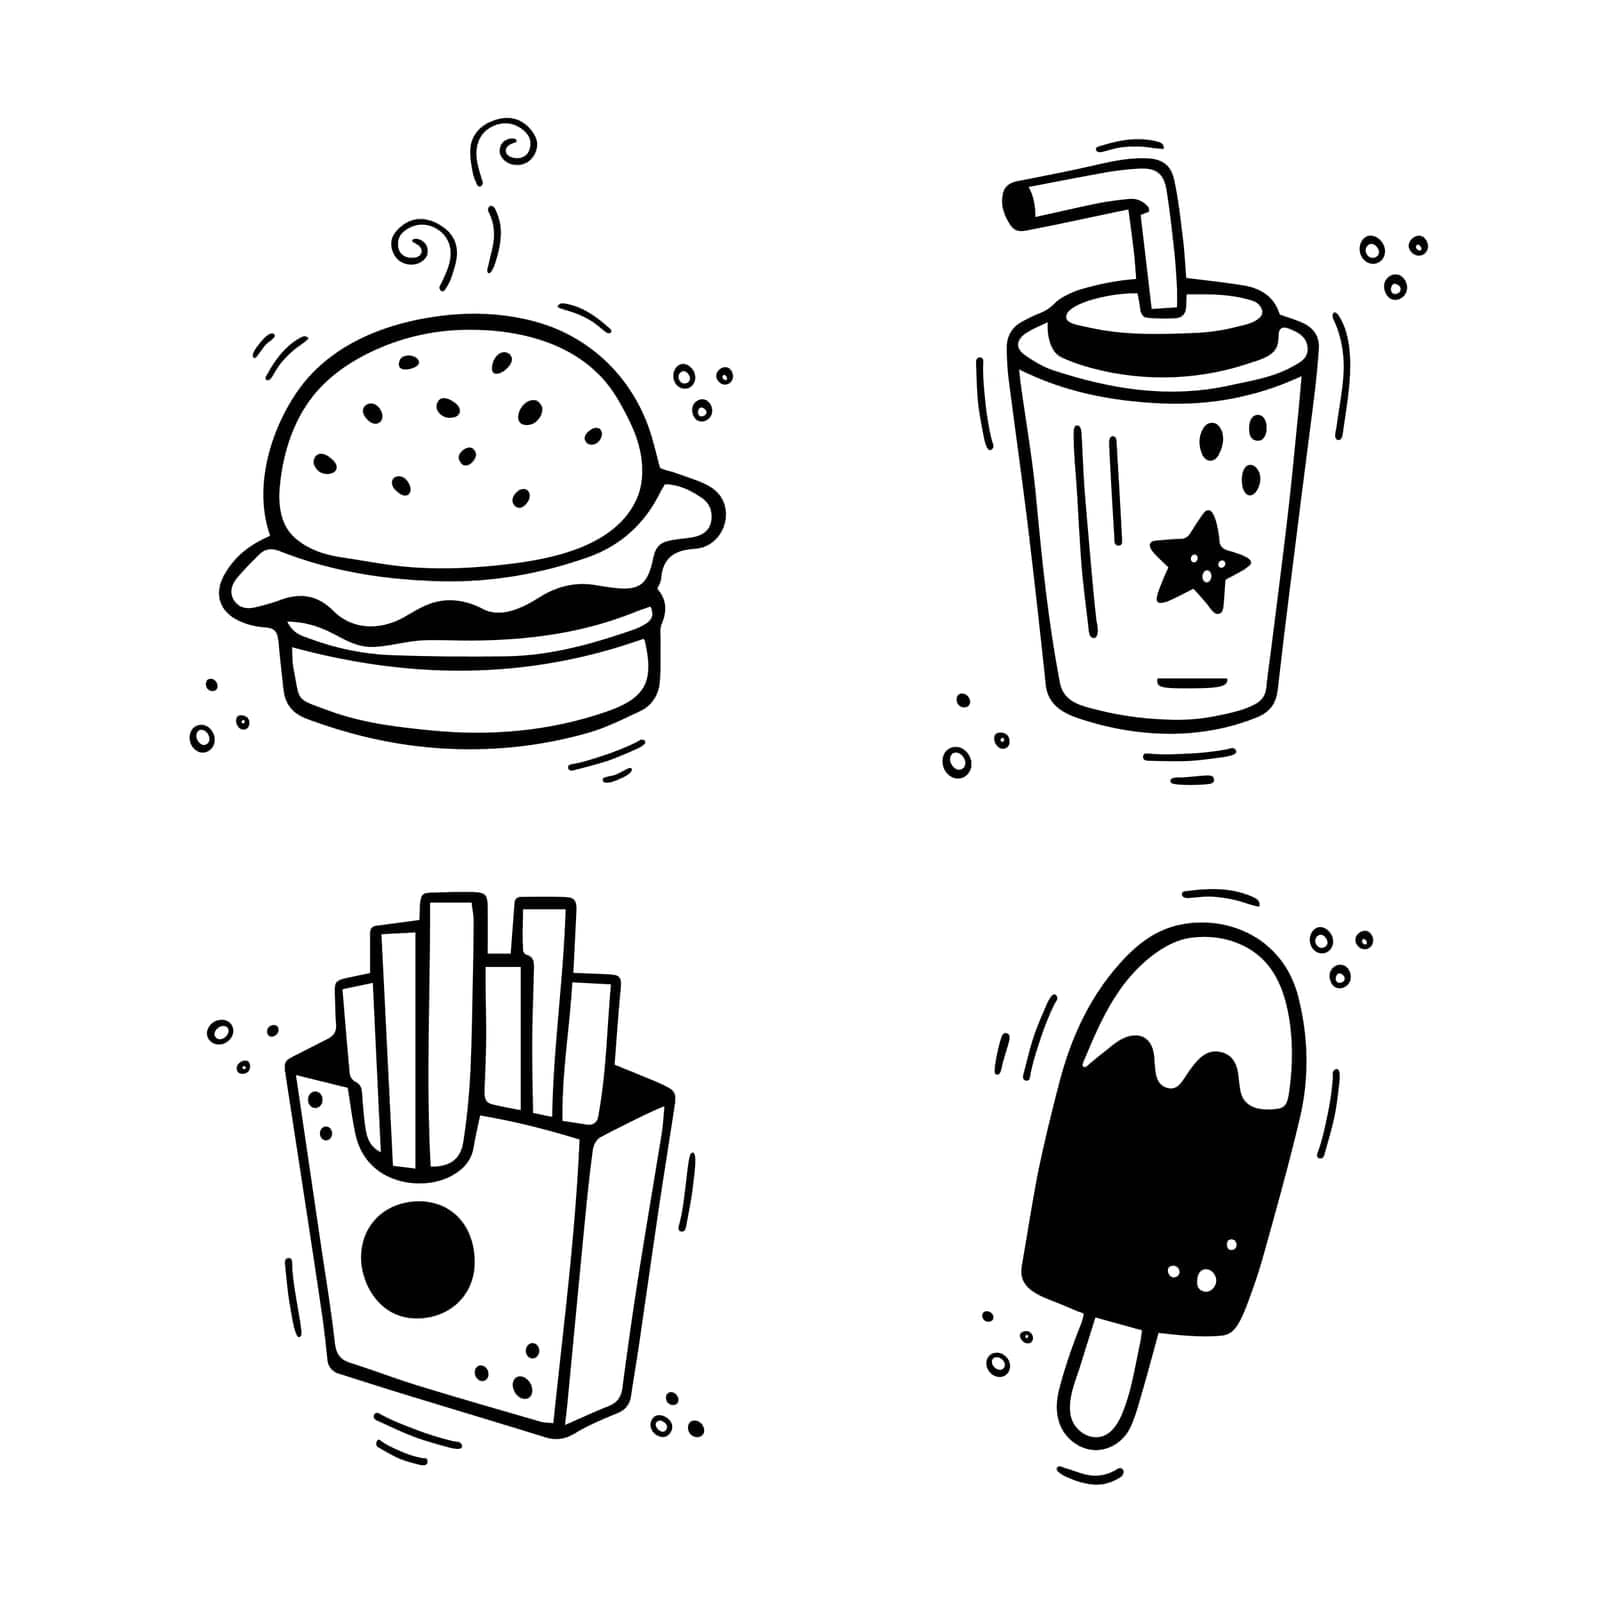 Fast food icons set - burger, French fries, paper cup with drink, ice cream. Hand drawn fast food combo. Comic doodle sketch style. Vector illustration